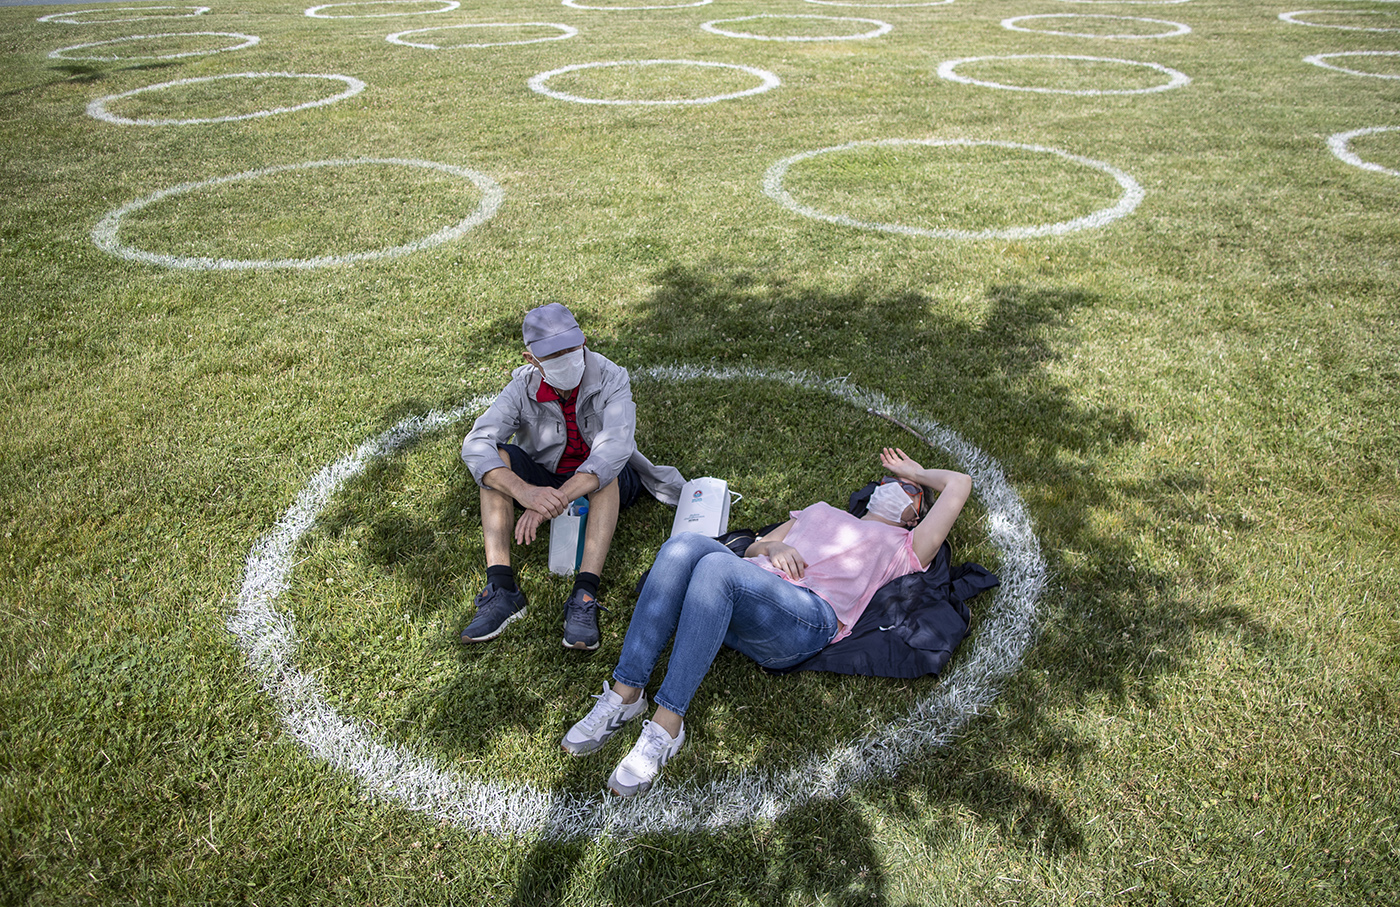 People wearing face masks sits in a circle marked by the municipality with social distance at the Maltepe Orhangazi city park in Istanbul, Turkey, 31 May 2020. The Turkish government allowed people aged 65 and above to go out for eight hours of a partial curfew imposed on senior citizens and those with chronic diseases, from going out in public and walking in open areas such as parks and gardens.